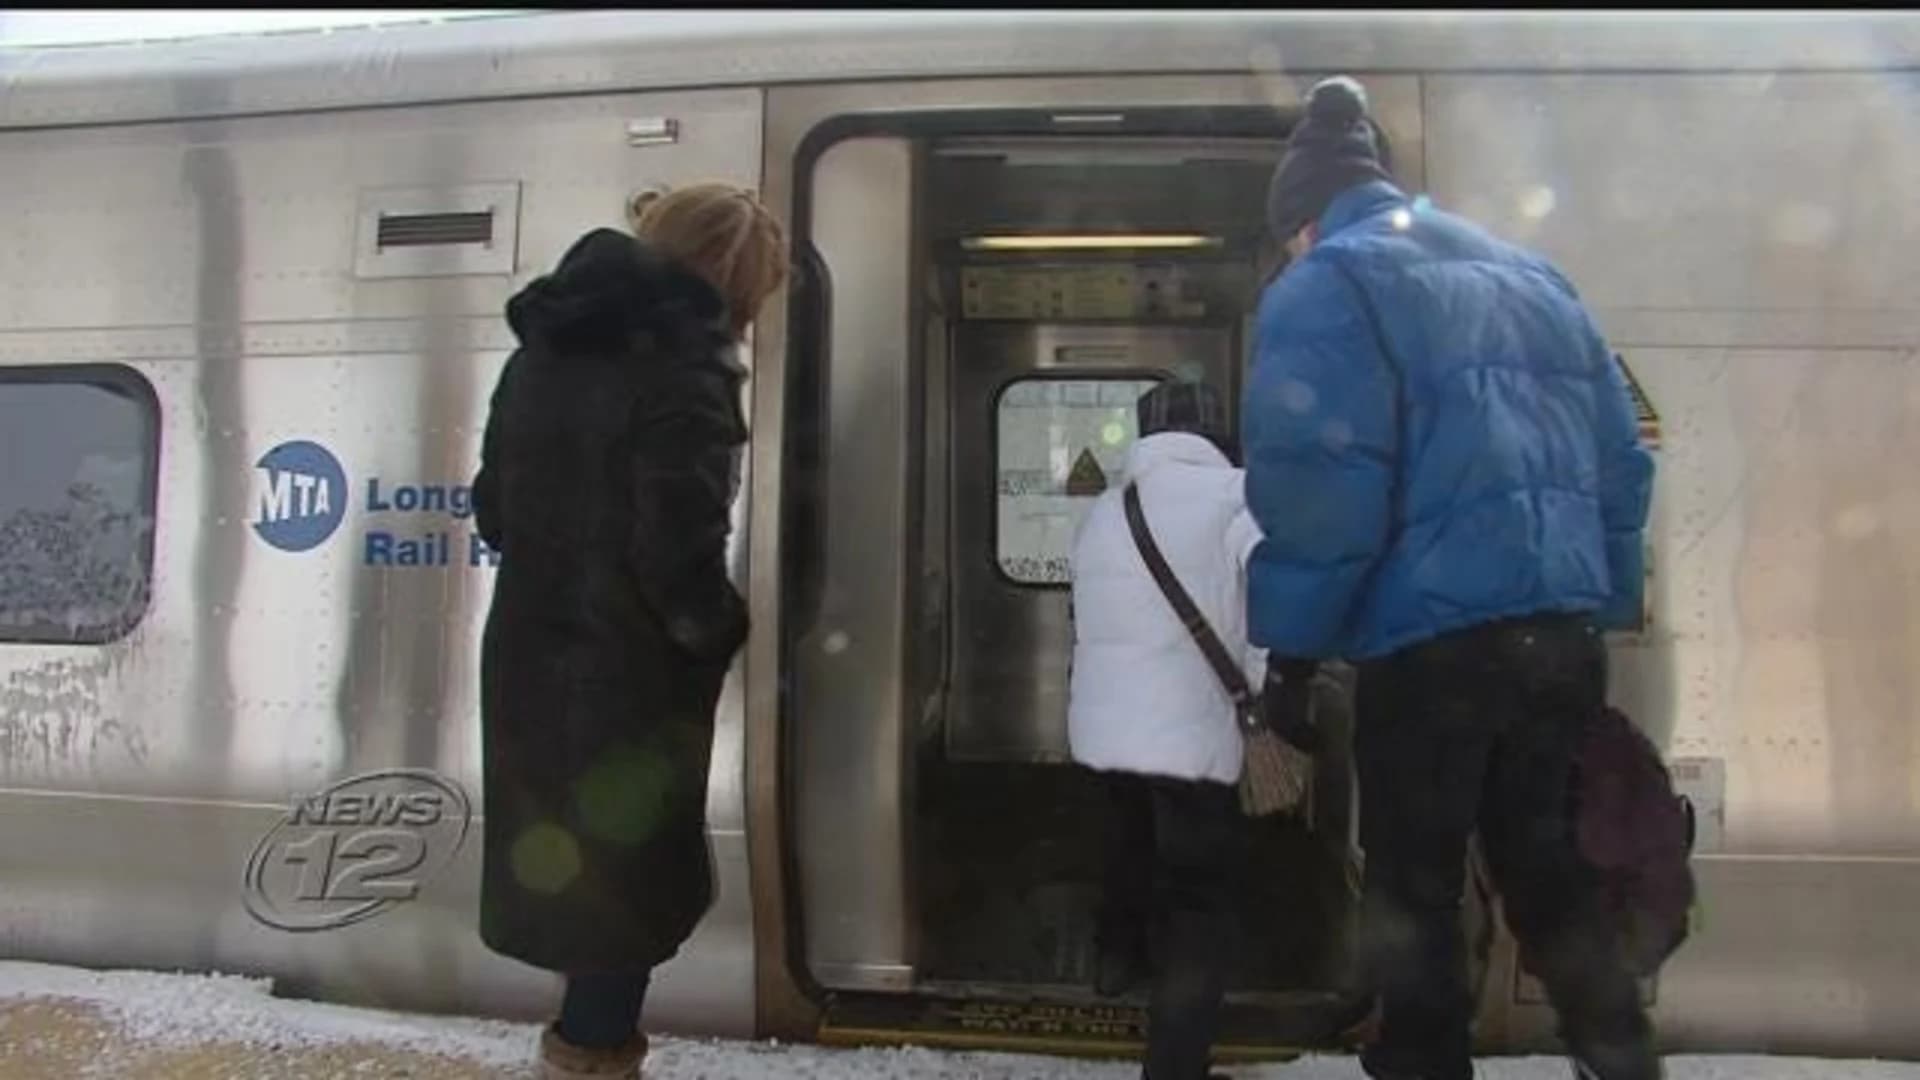 LIRR: Not enough train cars to serve booming ridership